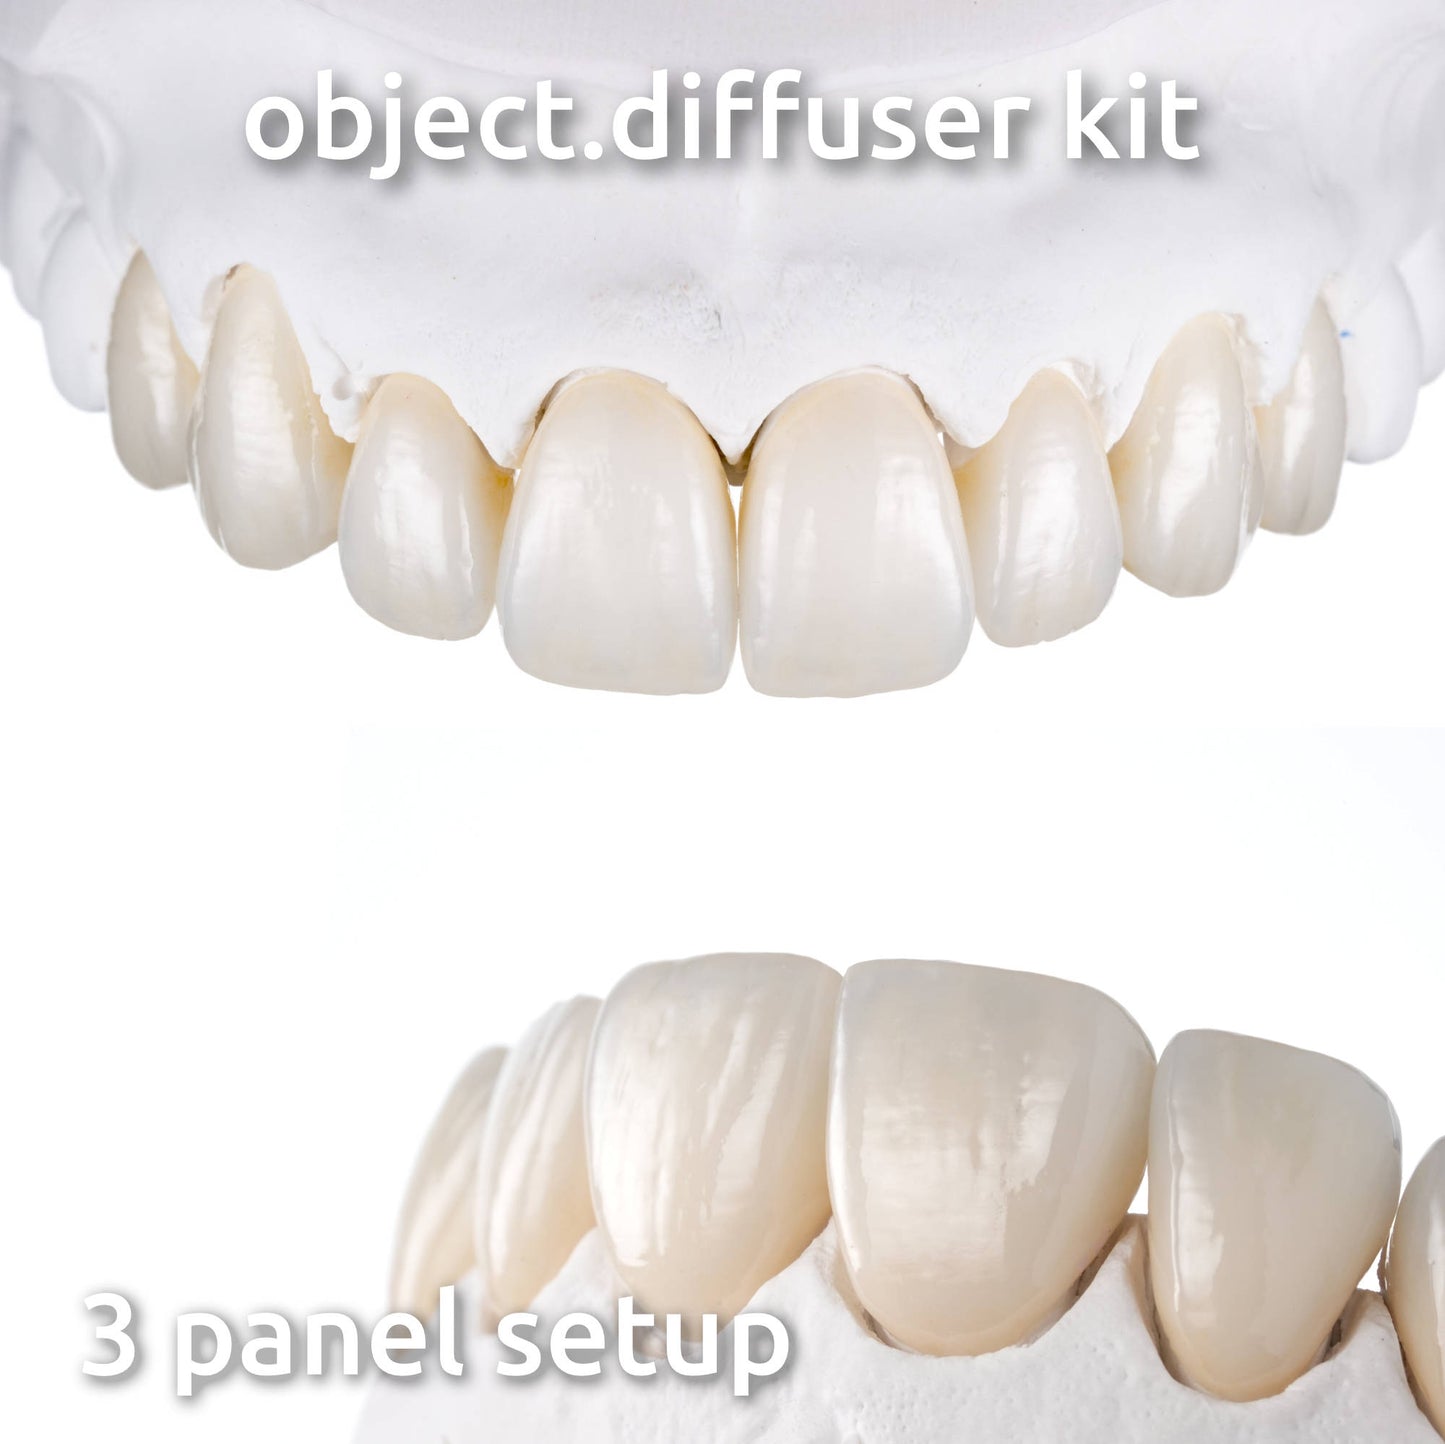 object.diffuser kit